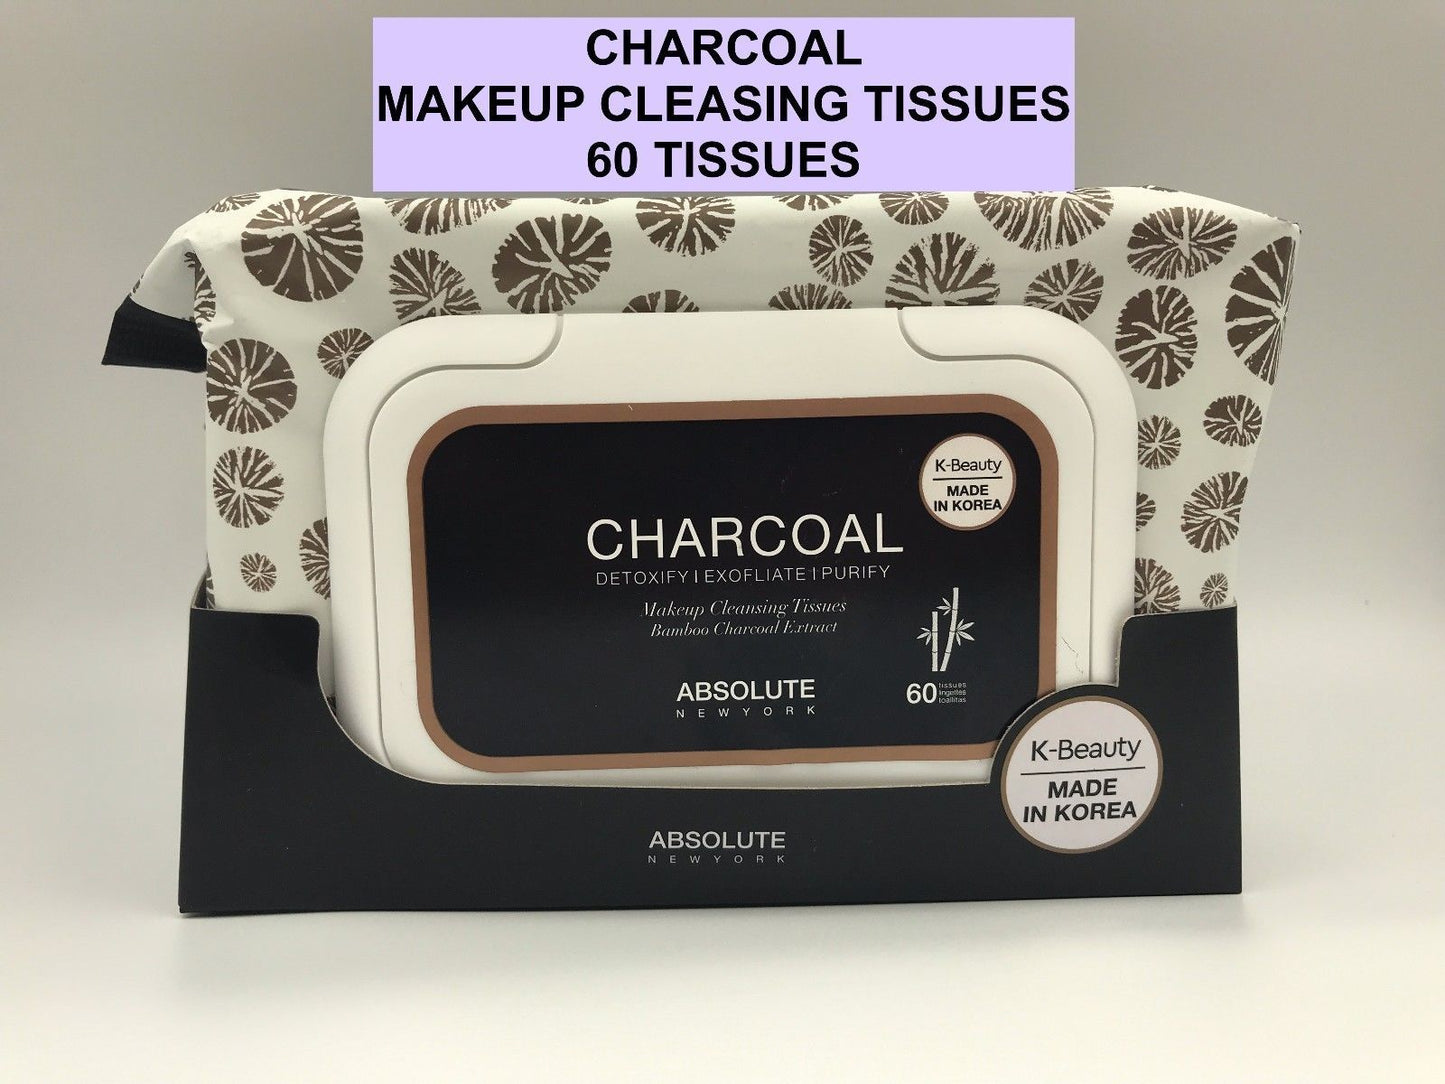 ABSOLUTE NEW YORK K-BEAUTY CHARCOAL MAKEUP CLEANSING TISSUES ACS01